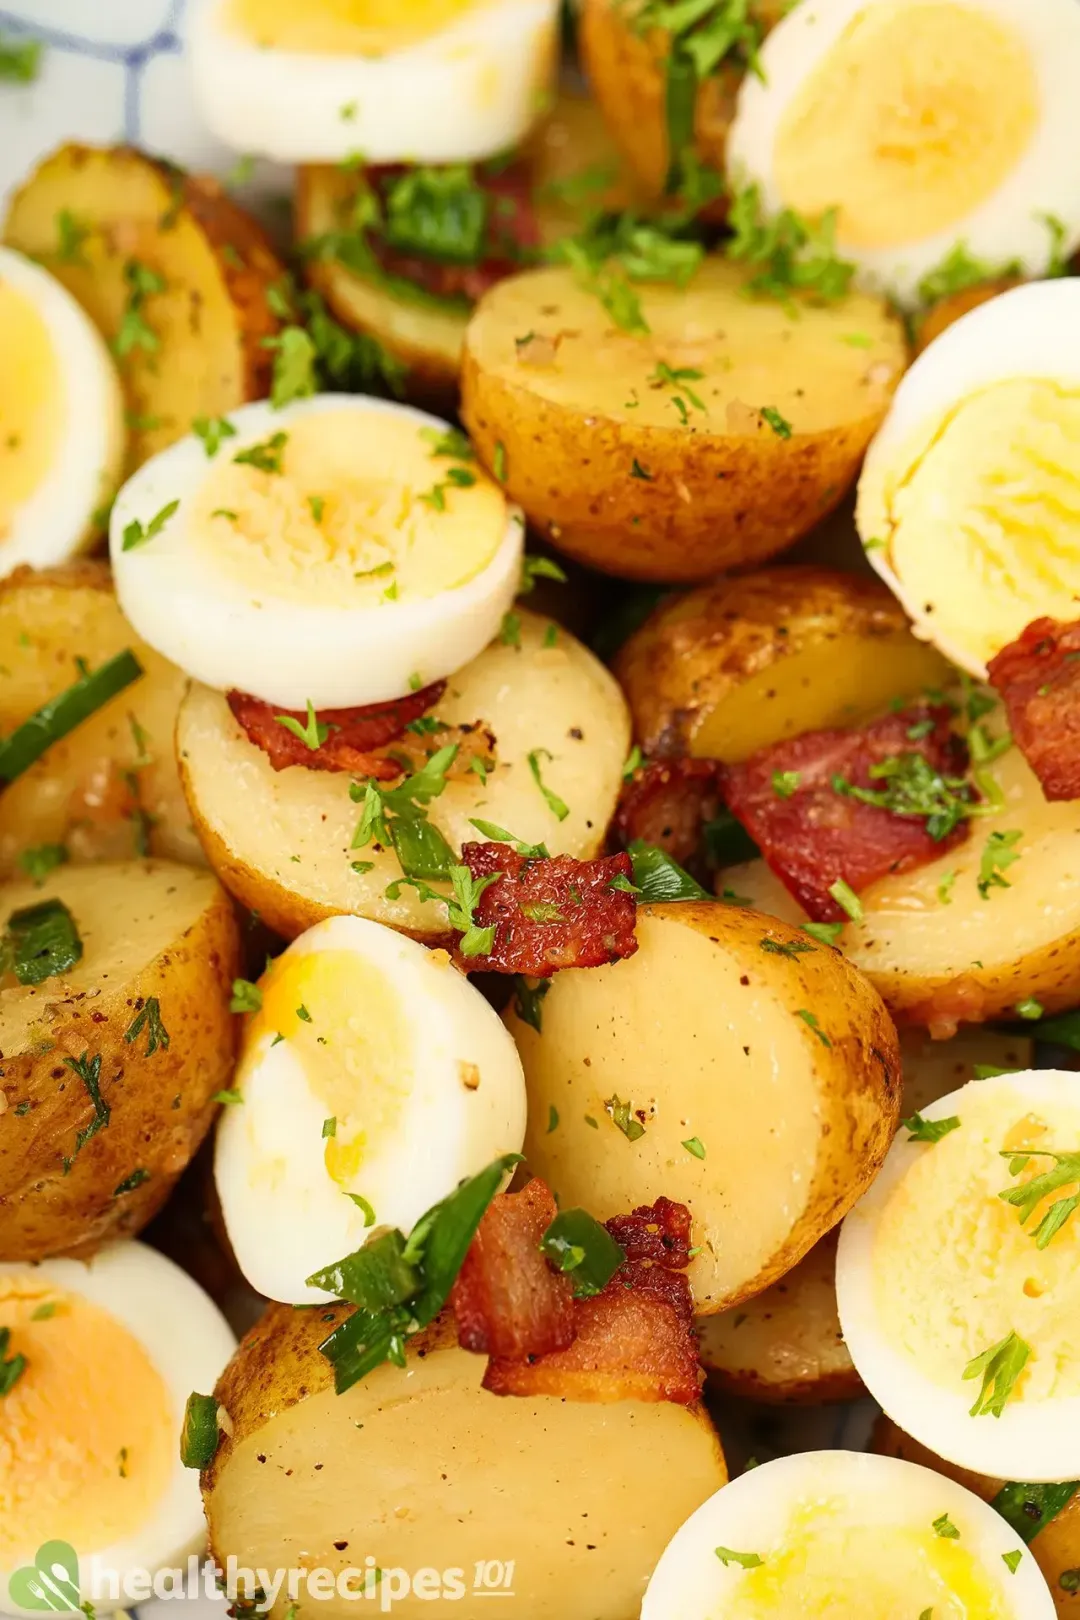 Can Potato Salad Be Served Warm